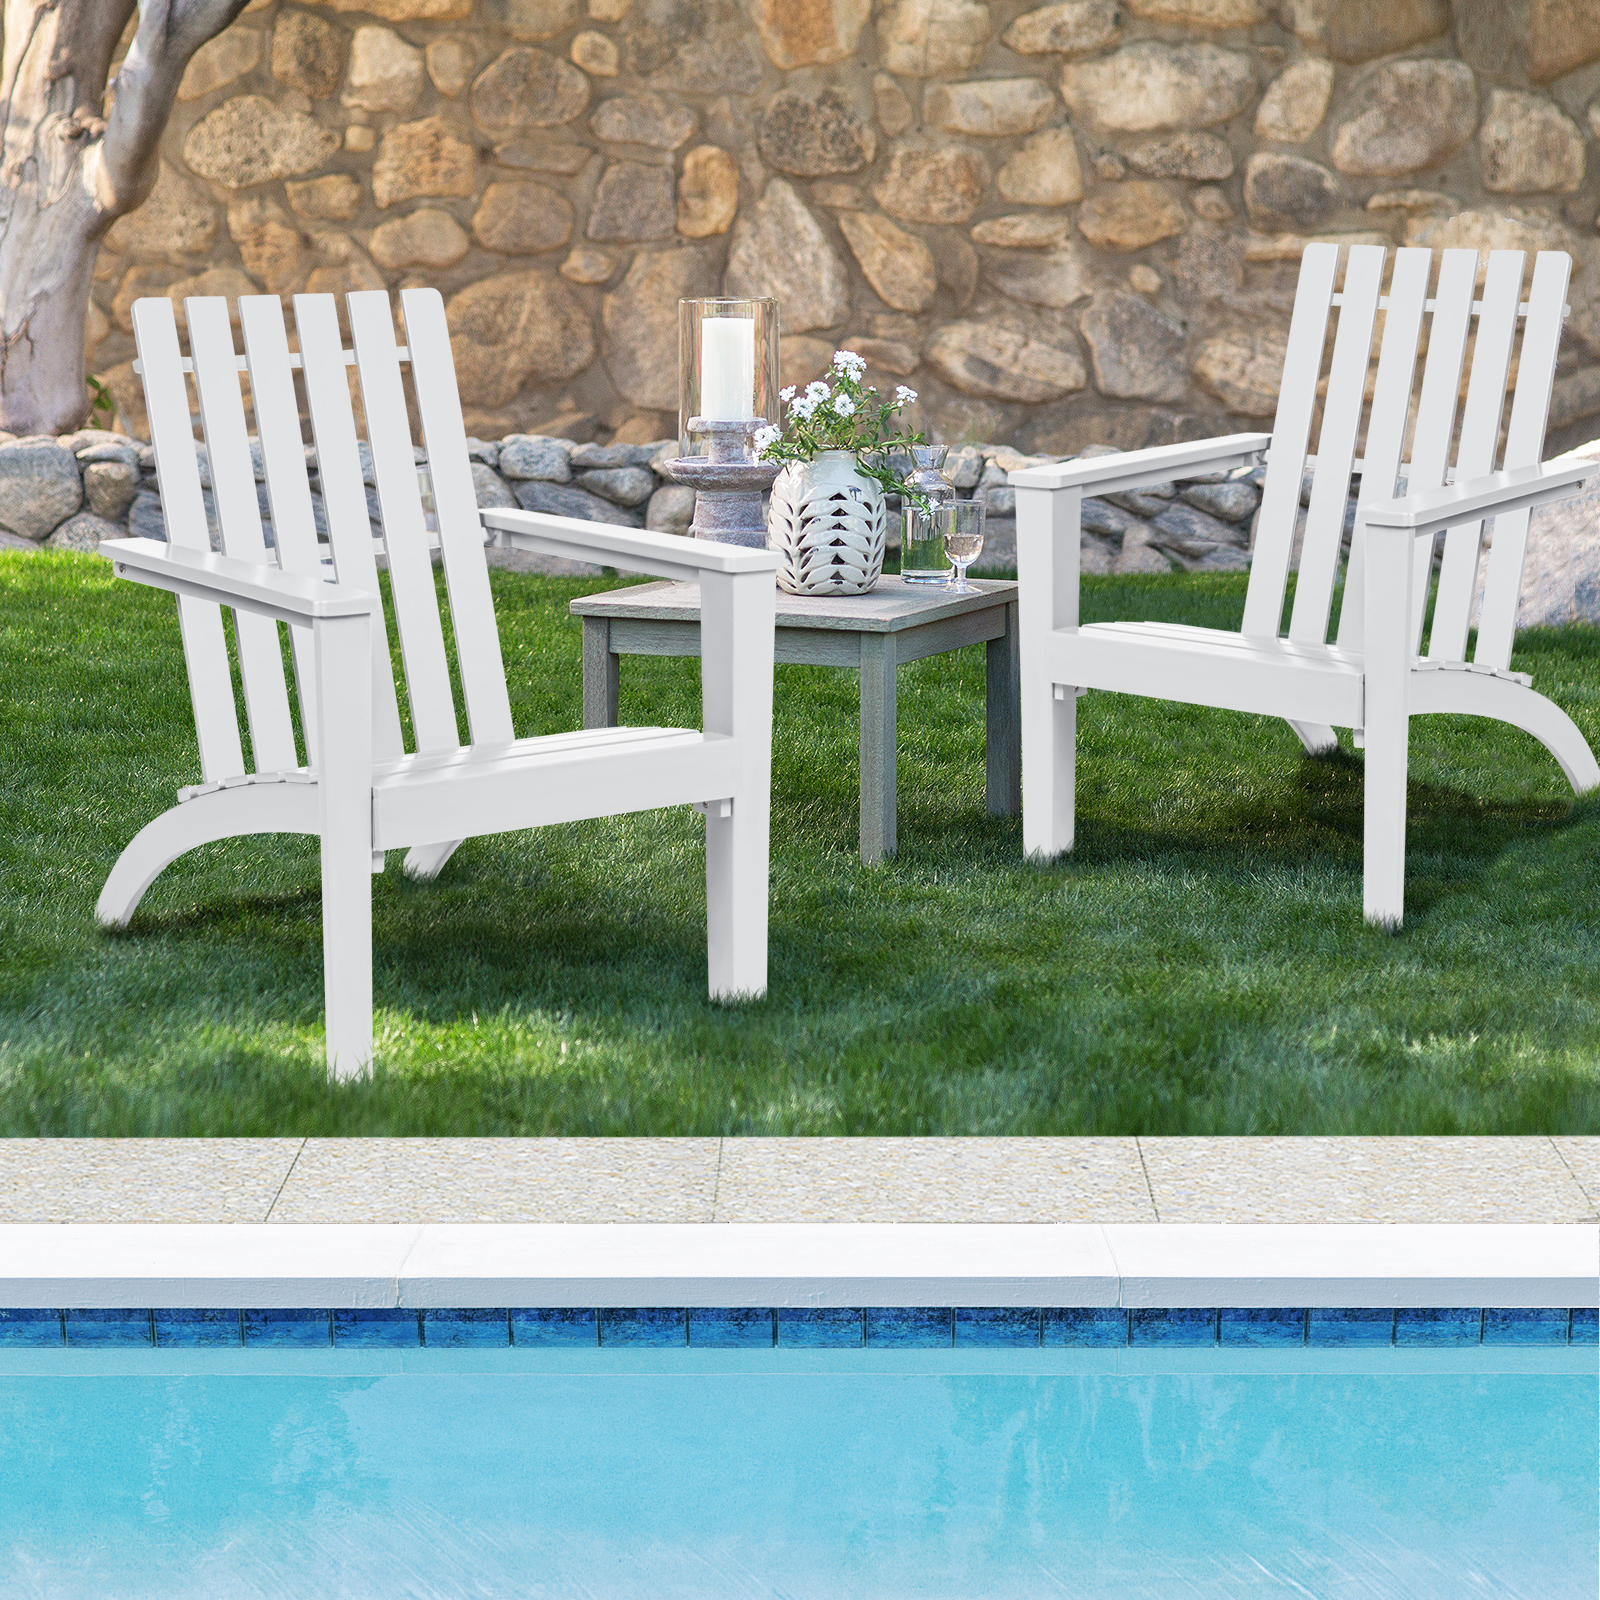 Patiojoy 3PCS Patio Adirondack Chair Side Table Set Solid Wood Garden Deck Bistro Set Classic Furniture Chair Set White - image 3 of 10